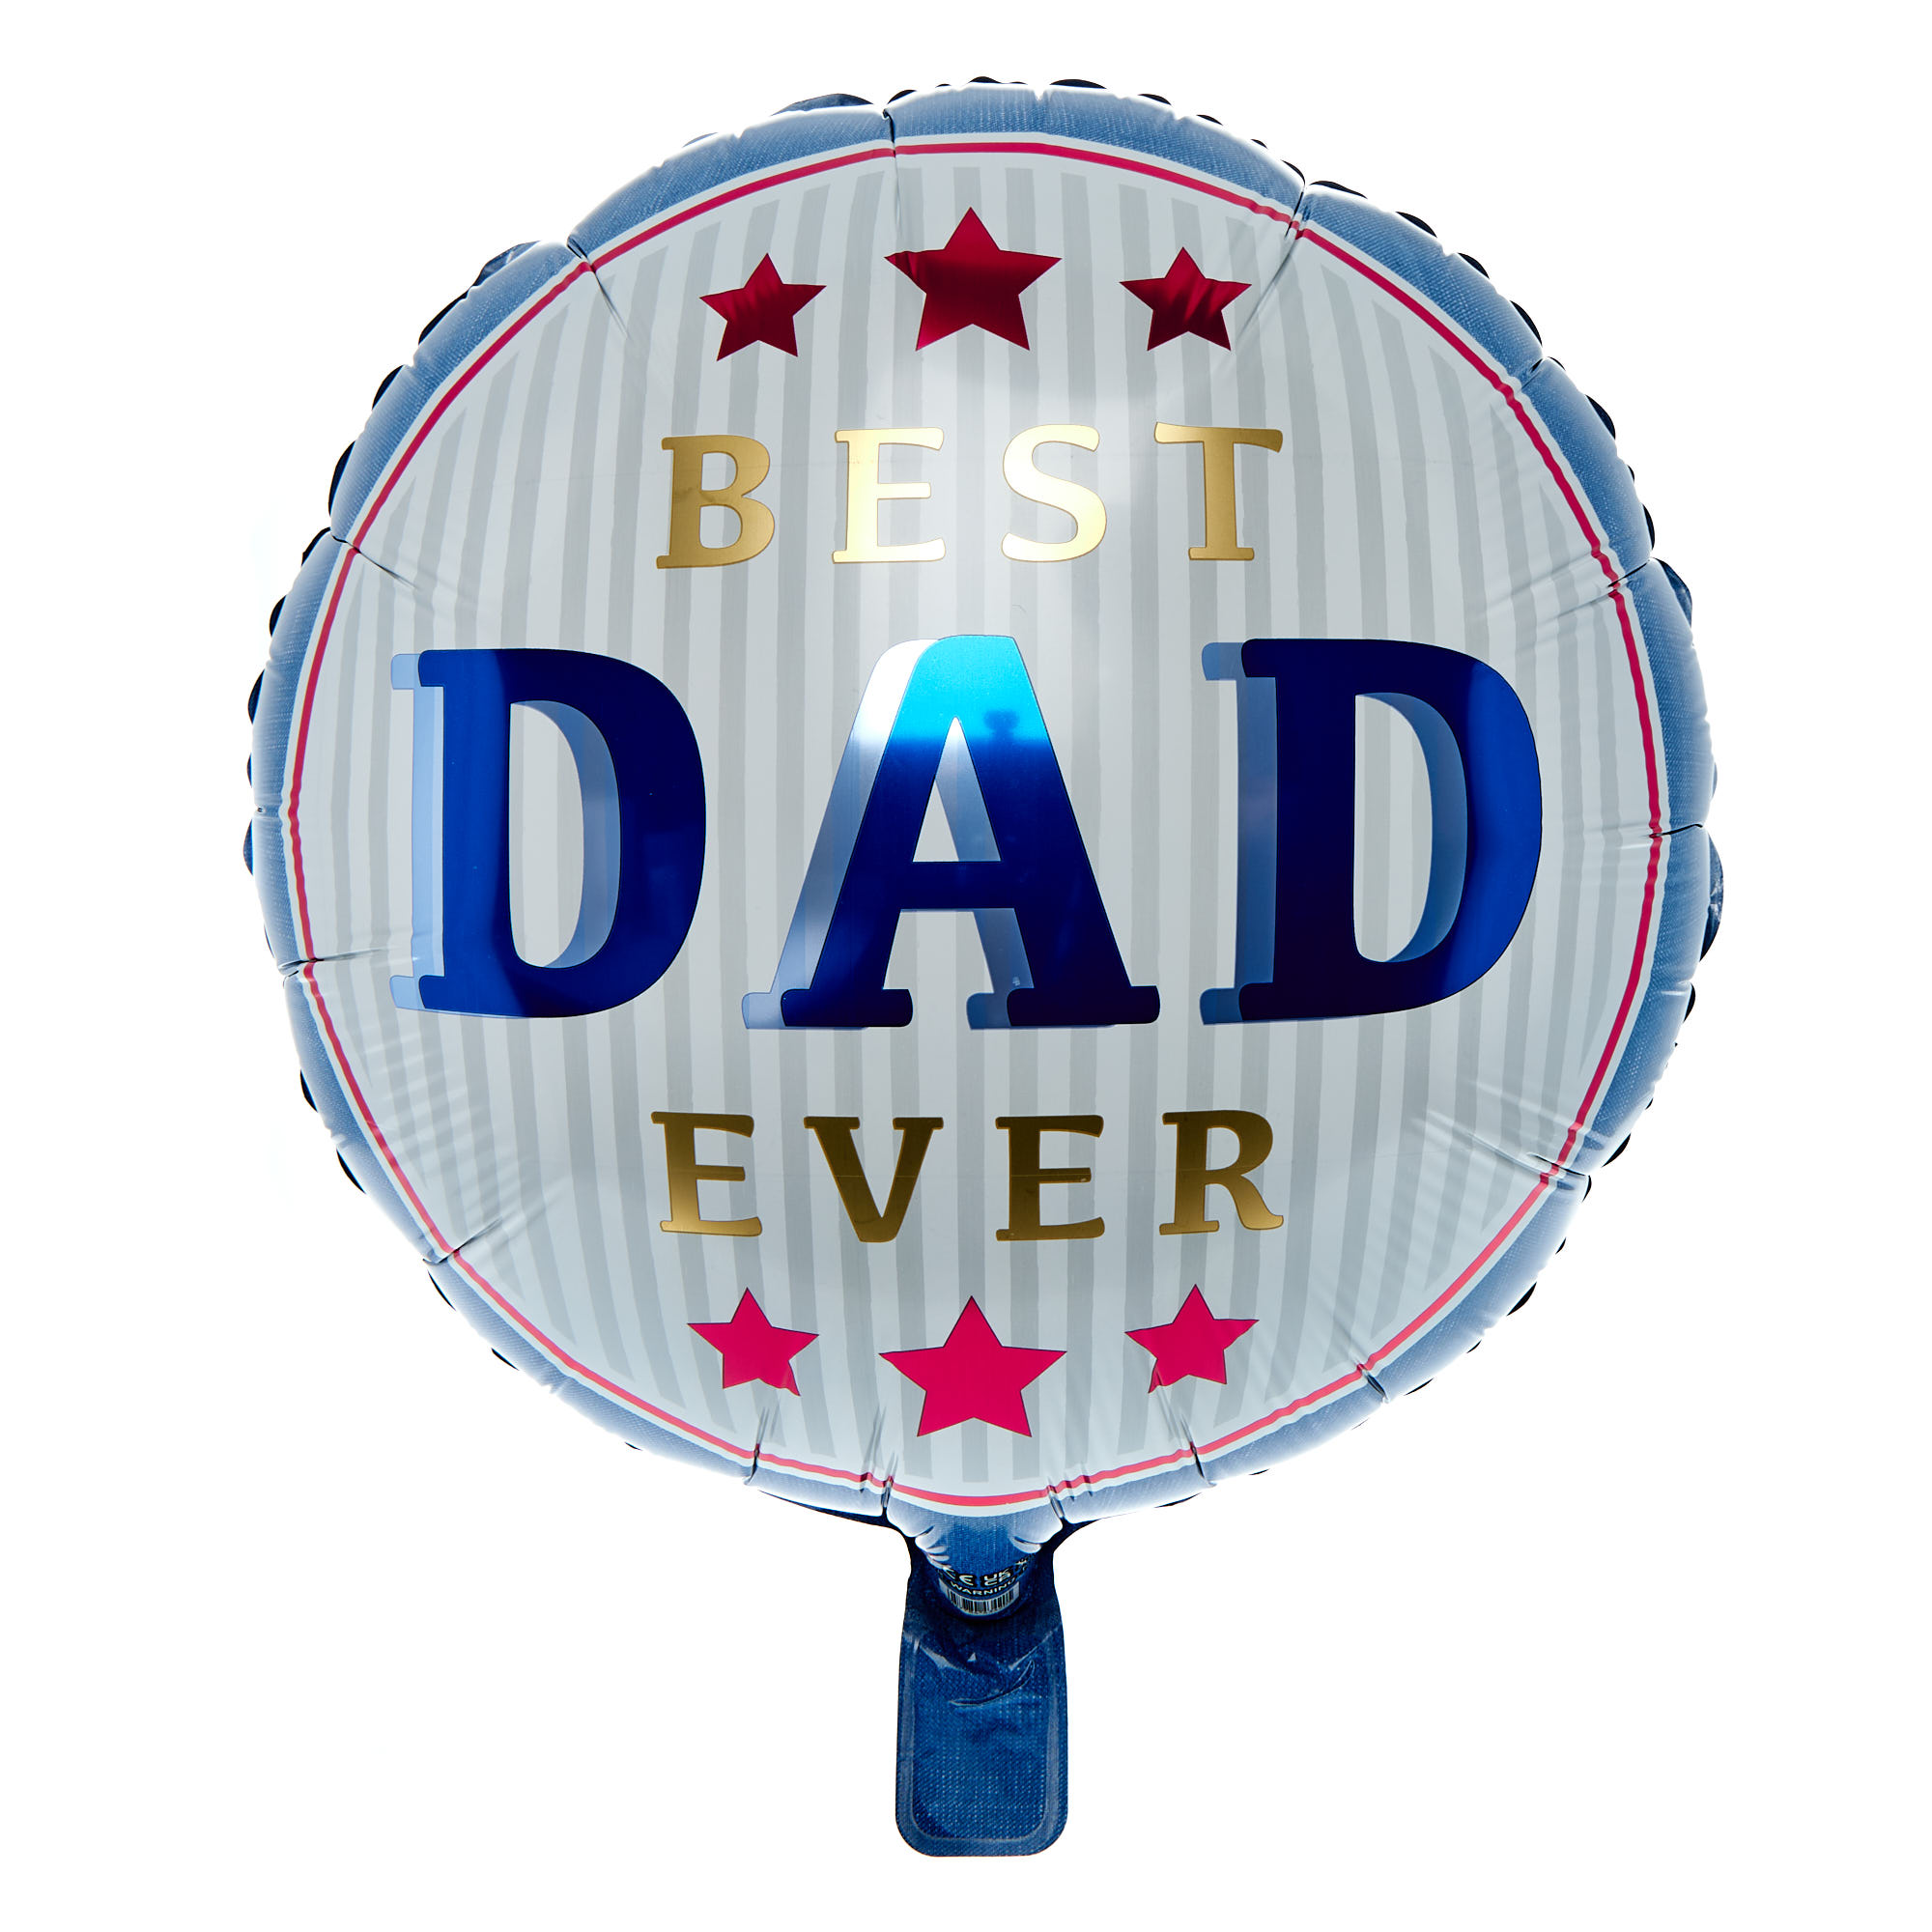 Best Dad Ever Balloon & Lindt Chocolate Box - FREE GIFT CARD!